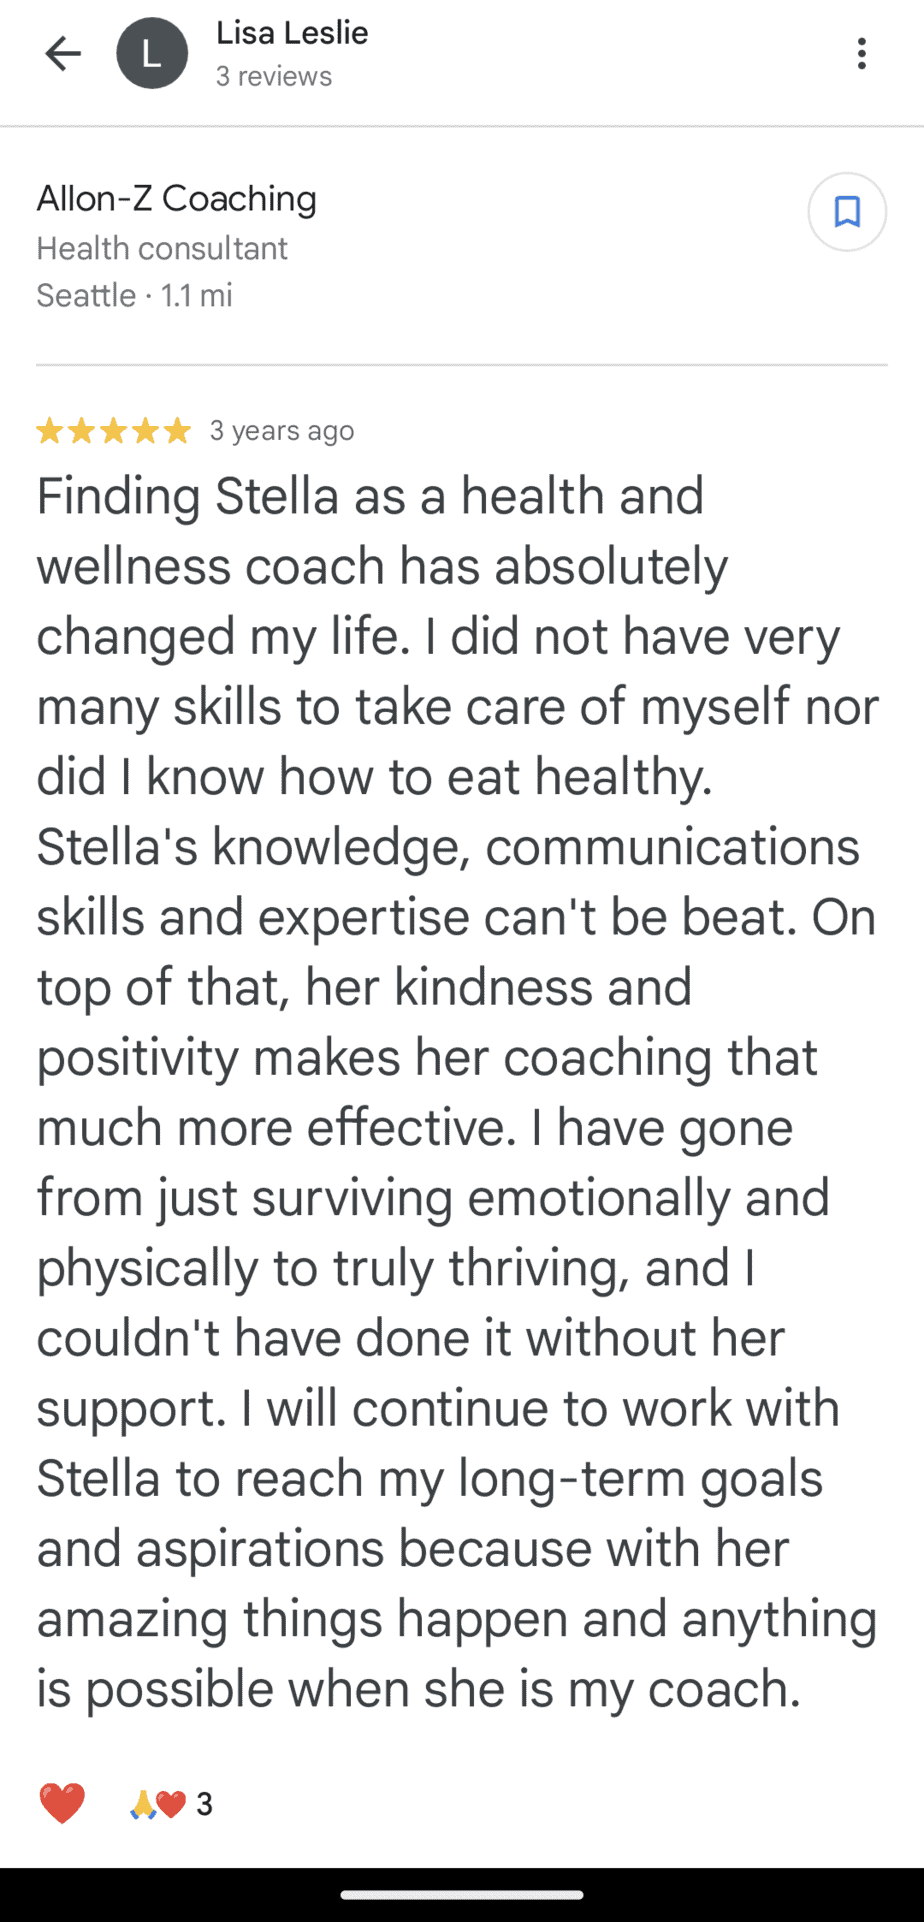 5-Star review for the services of Stella Loichot as a Health Coach in Seattle